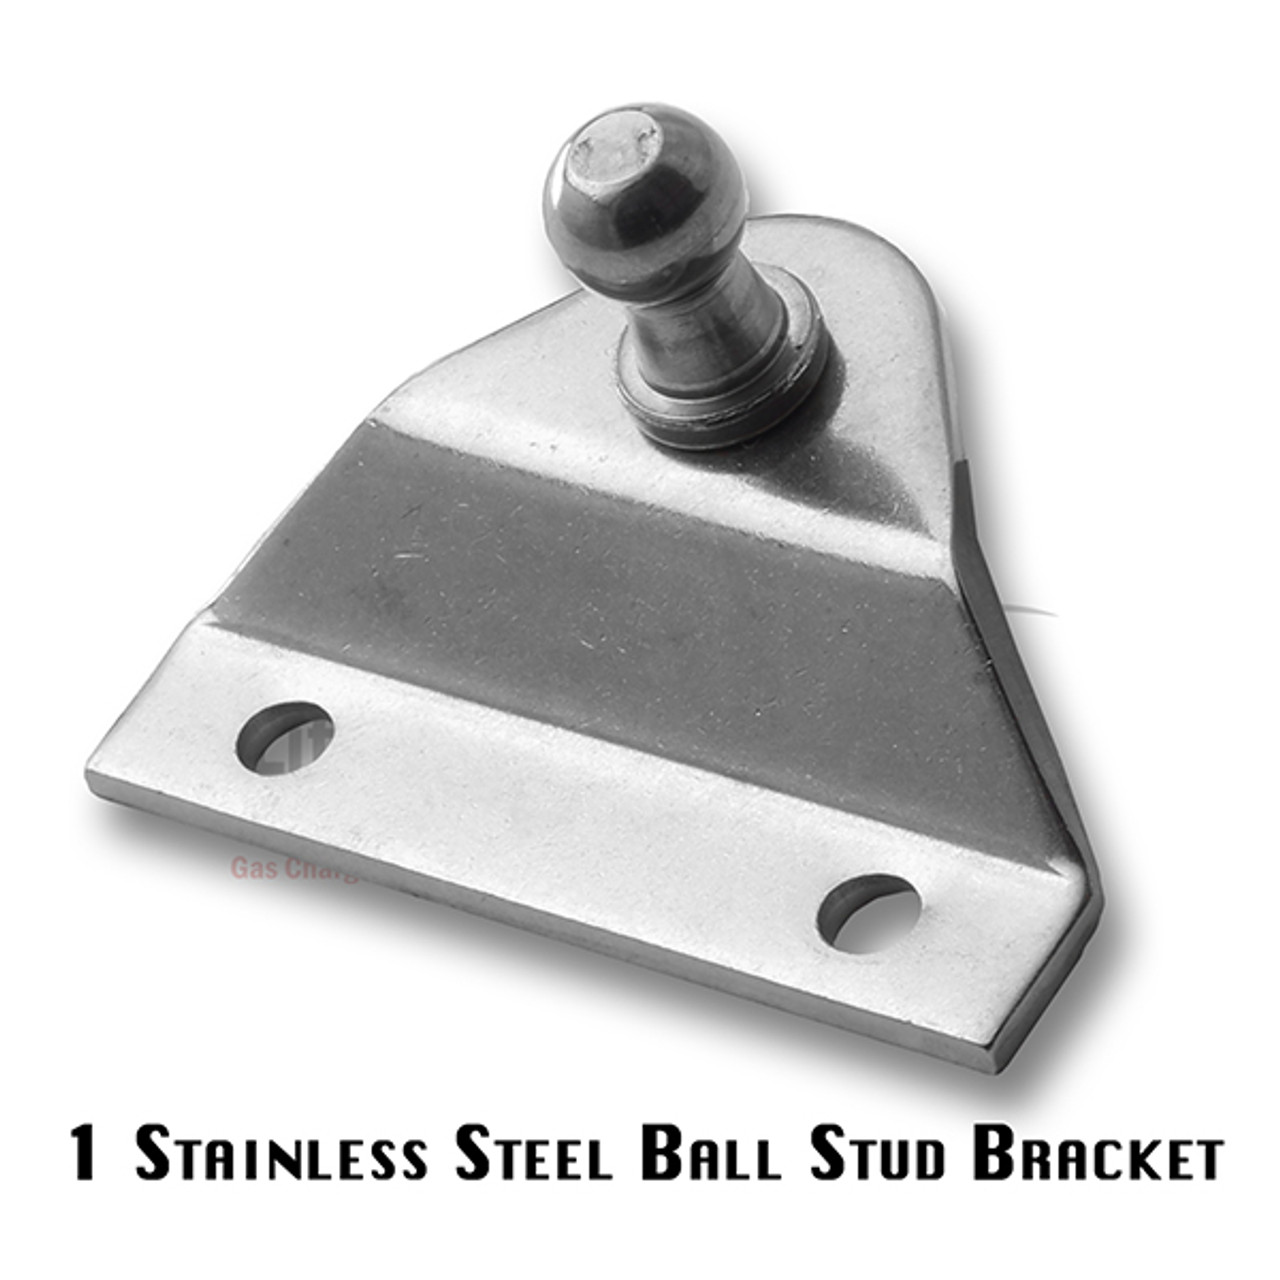 Hinge Bracket #O-B with Stainless Steel Fasteners